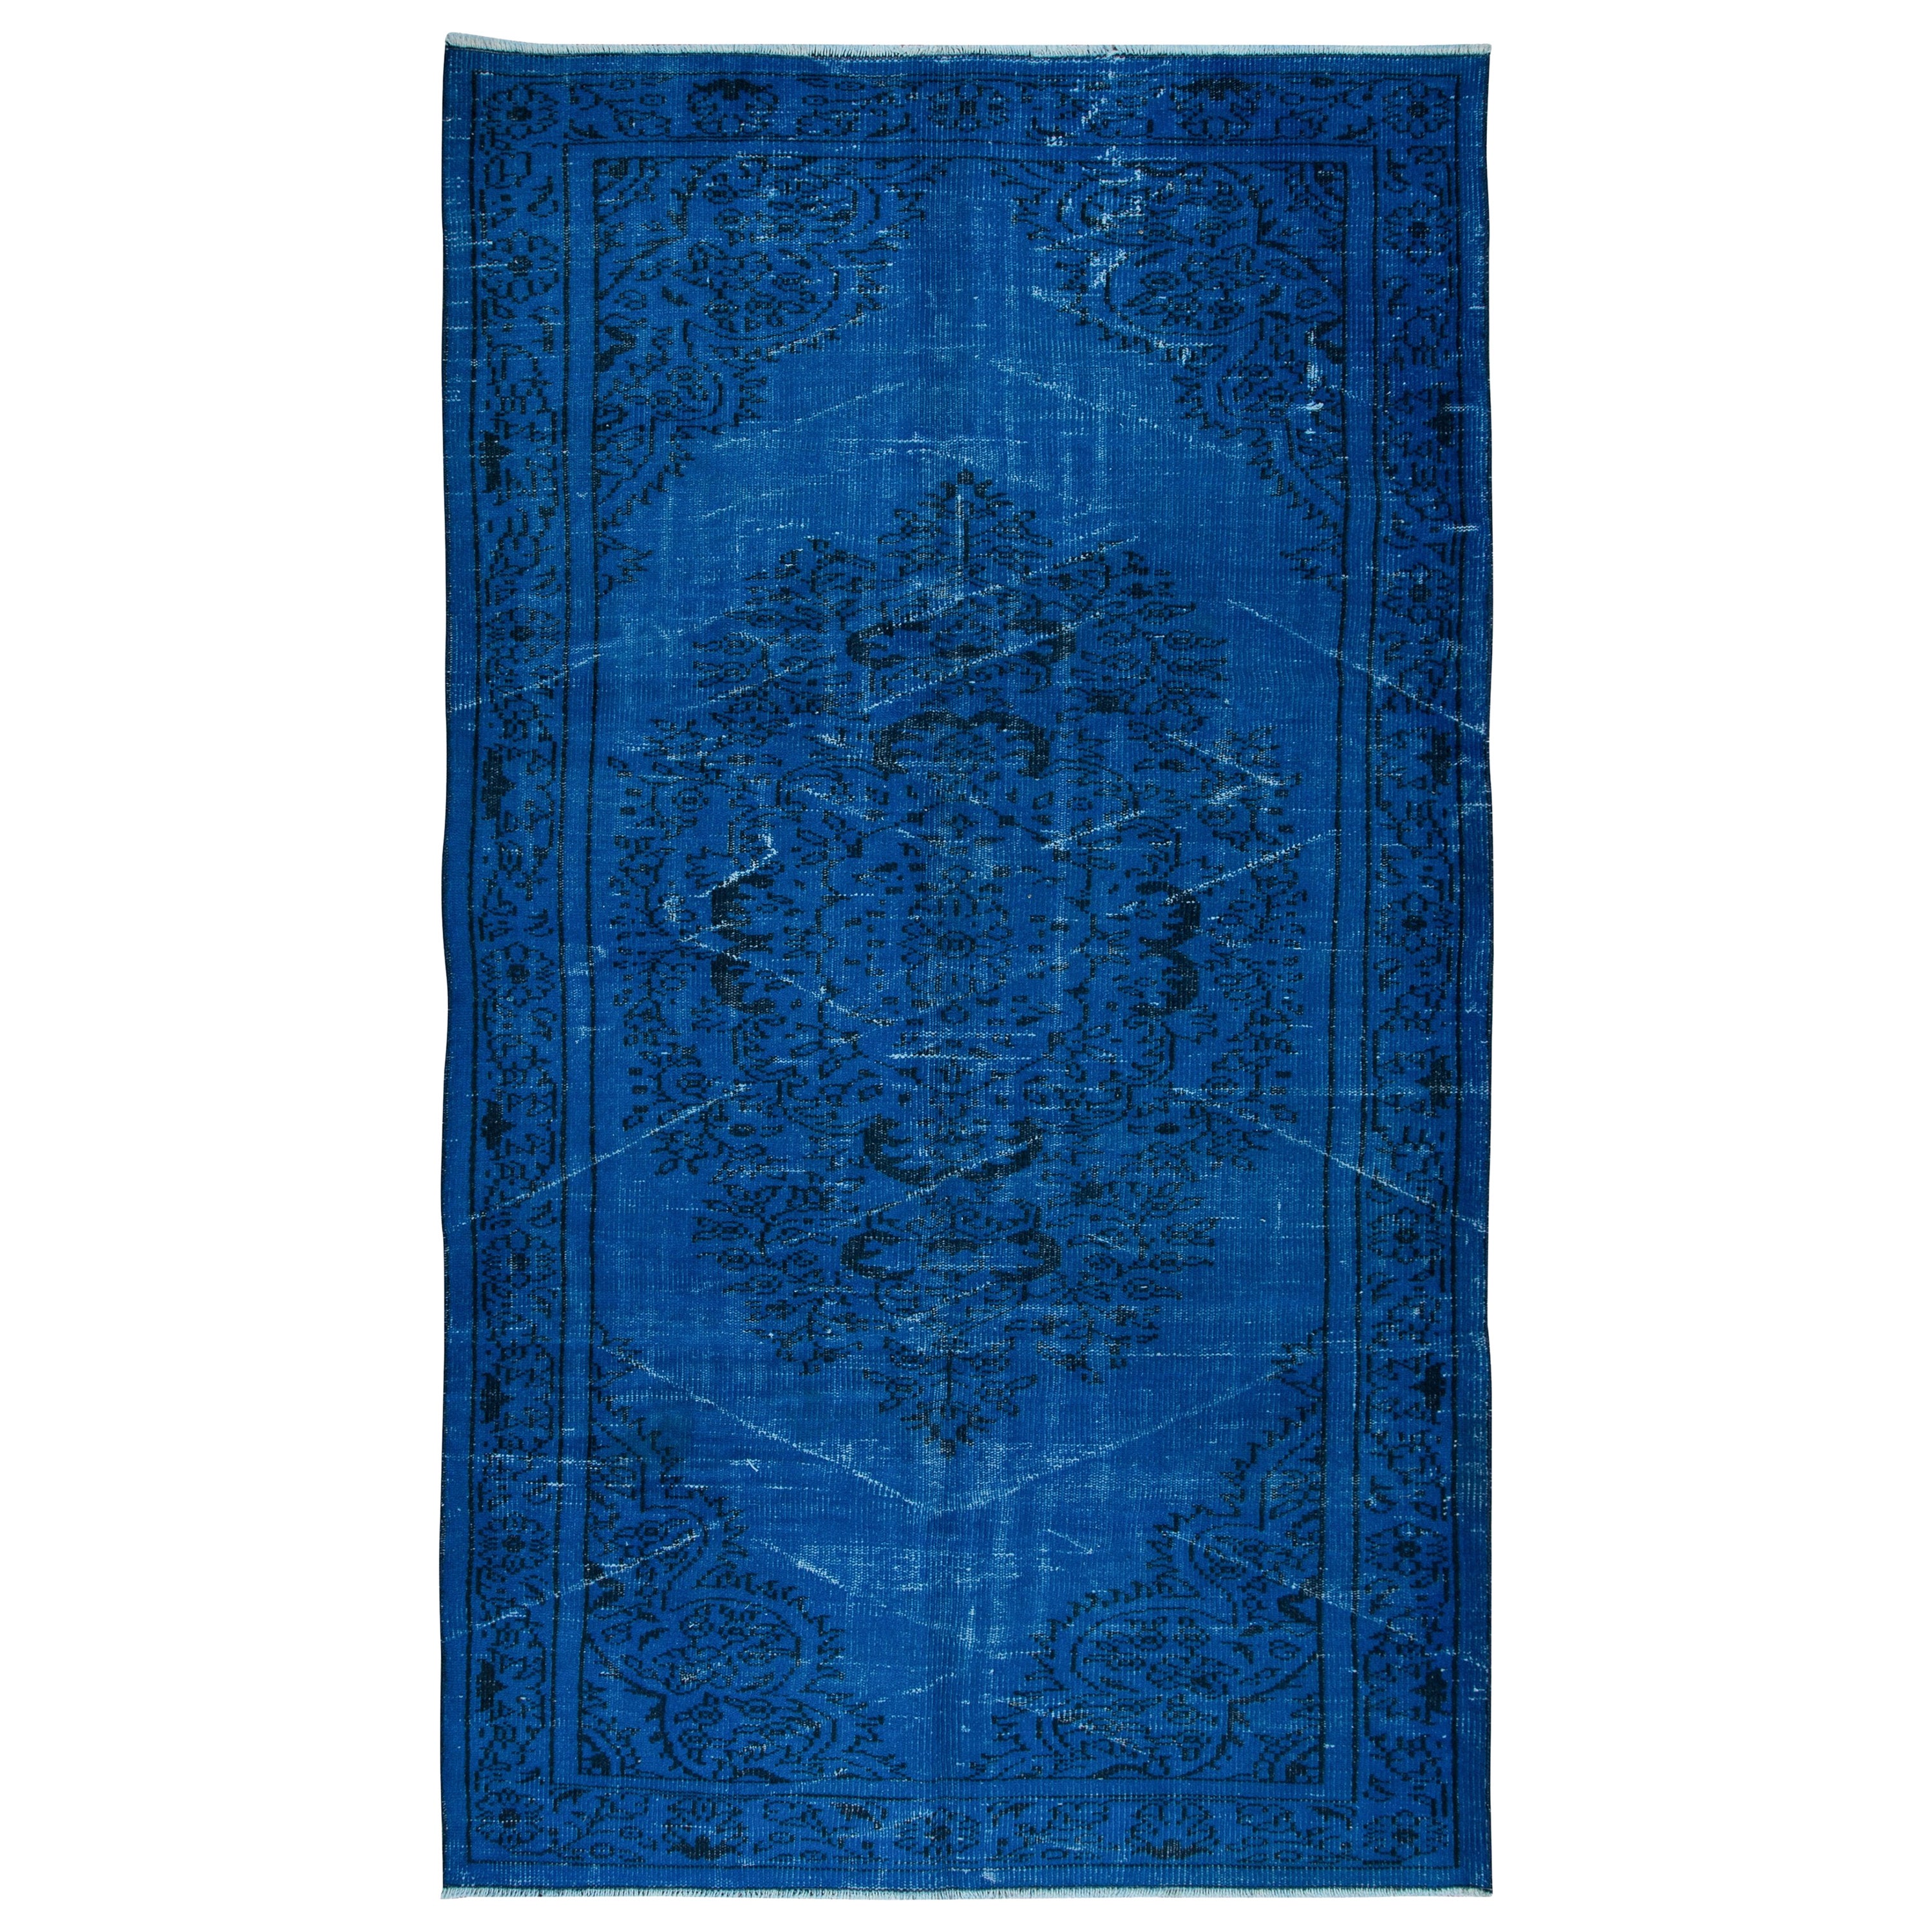 5x8.7 Ft Overdyed Wool Blue Area Rug, Handmade in Turkey, Modern Upcycled Carpet